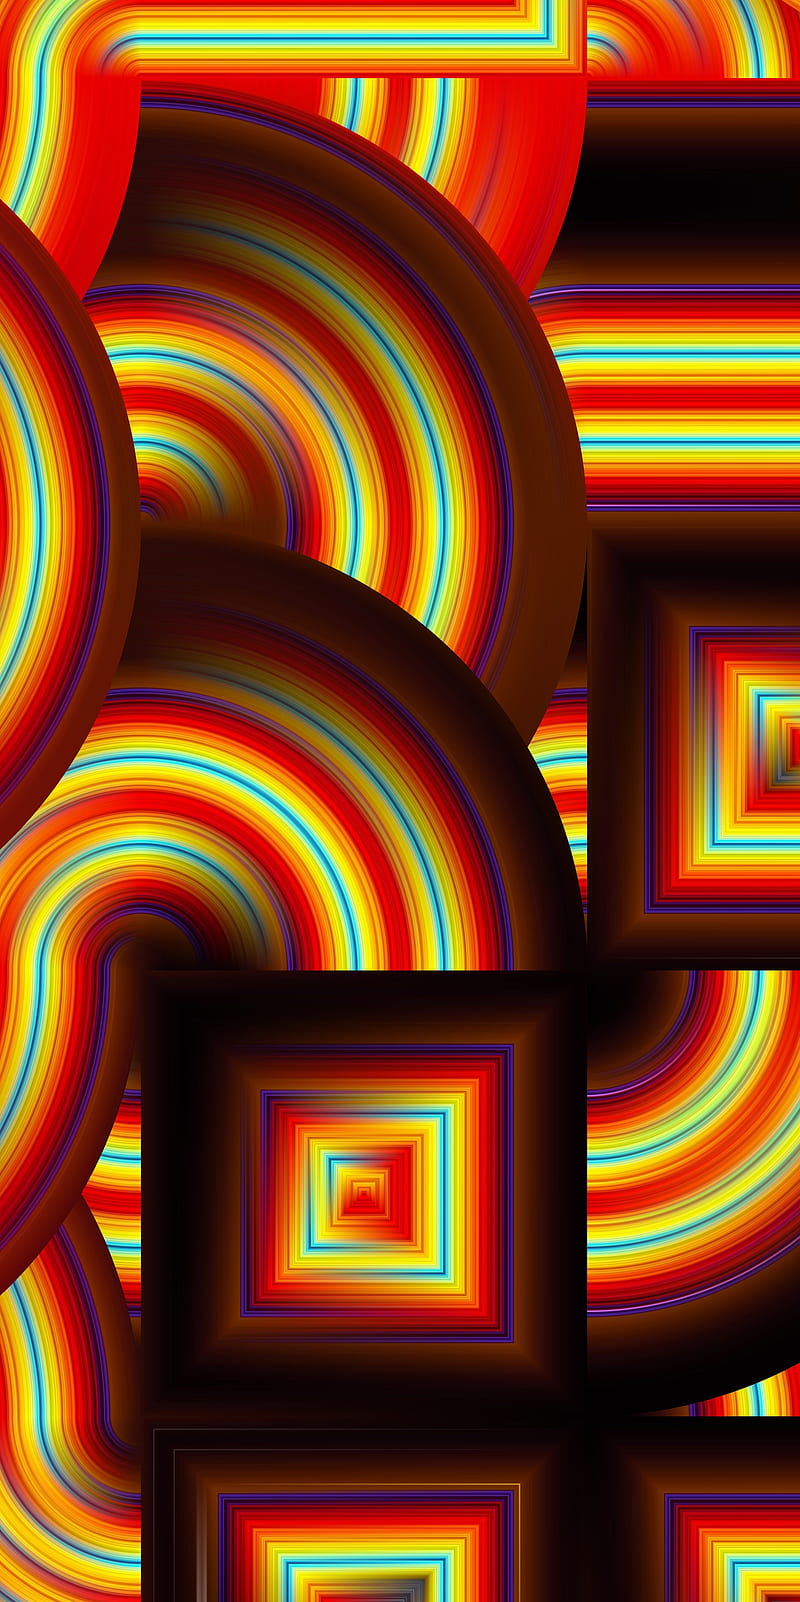 Trippy Dimension, Fractal, Hypnotizing, abstract, acid, colorful, dark, geometric, glow, hall of fame, hippie, illusion, infinite, lgbtq, loop, love, melting, neon, night, pride, pride month, rainbow, surreal, tunnel, vision, zooming, HD phone wallpaper